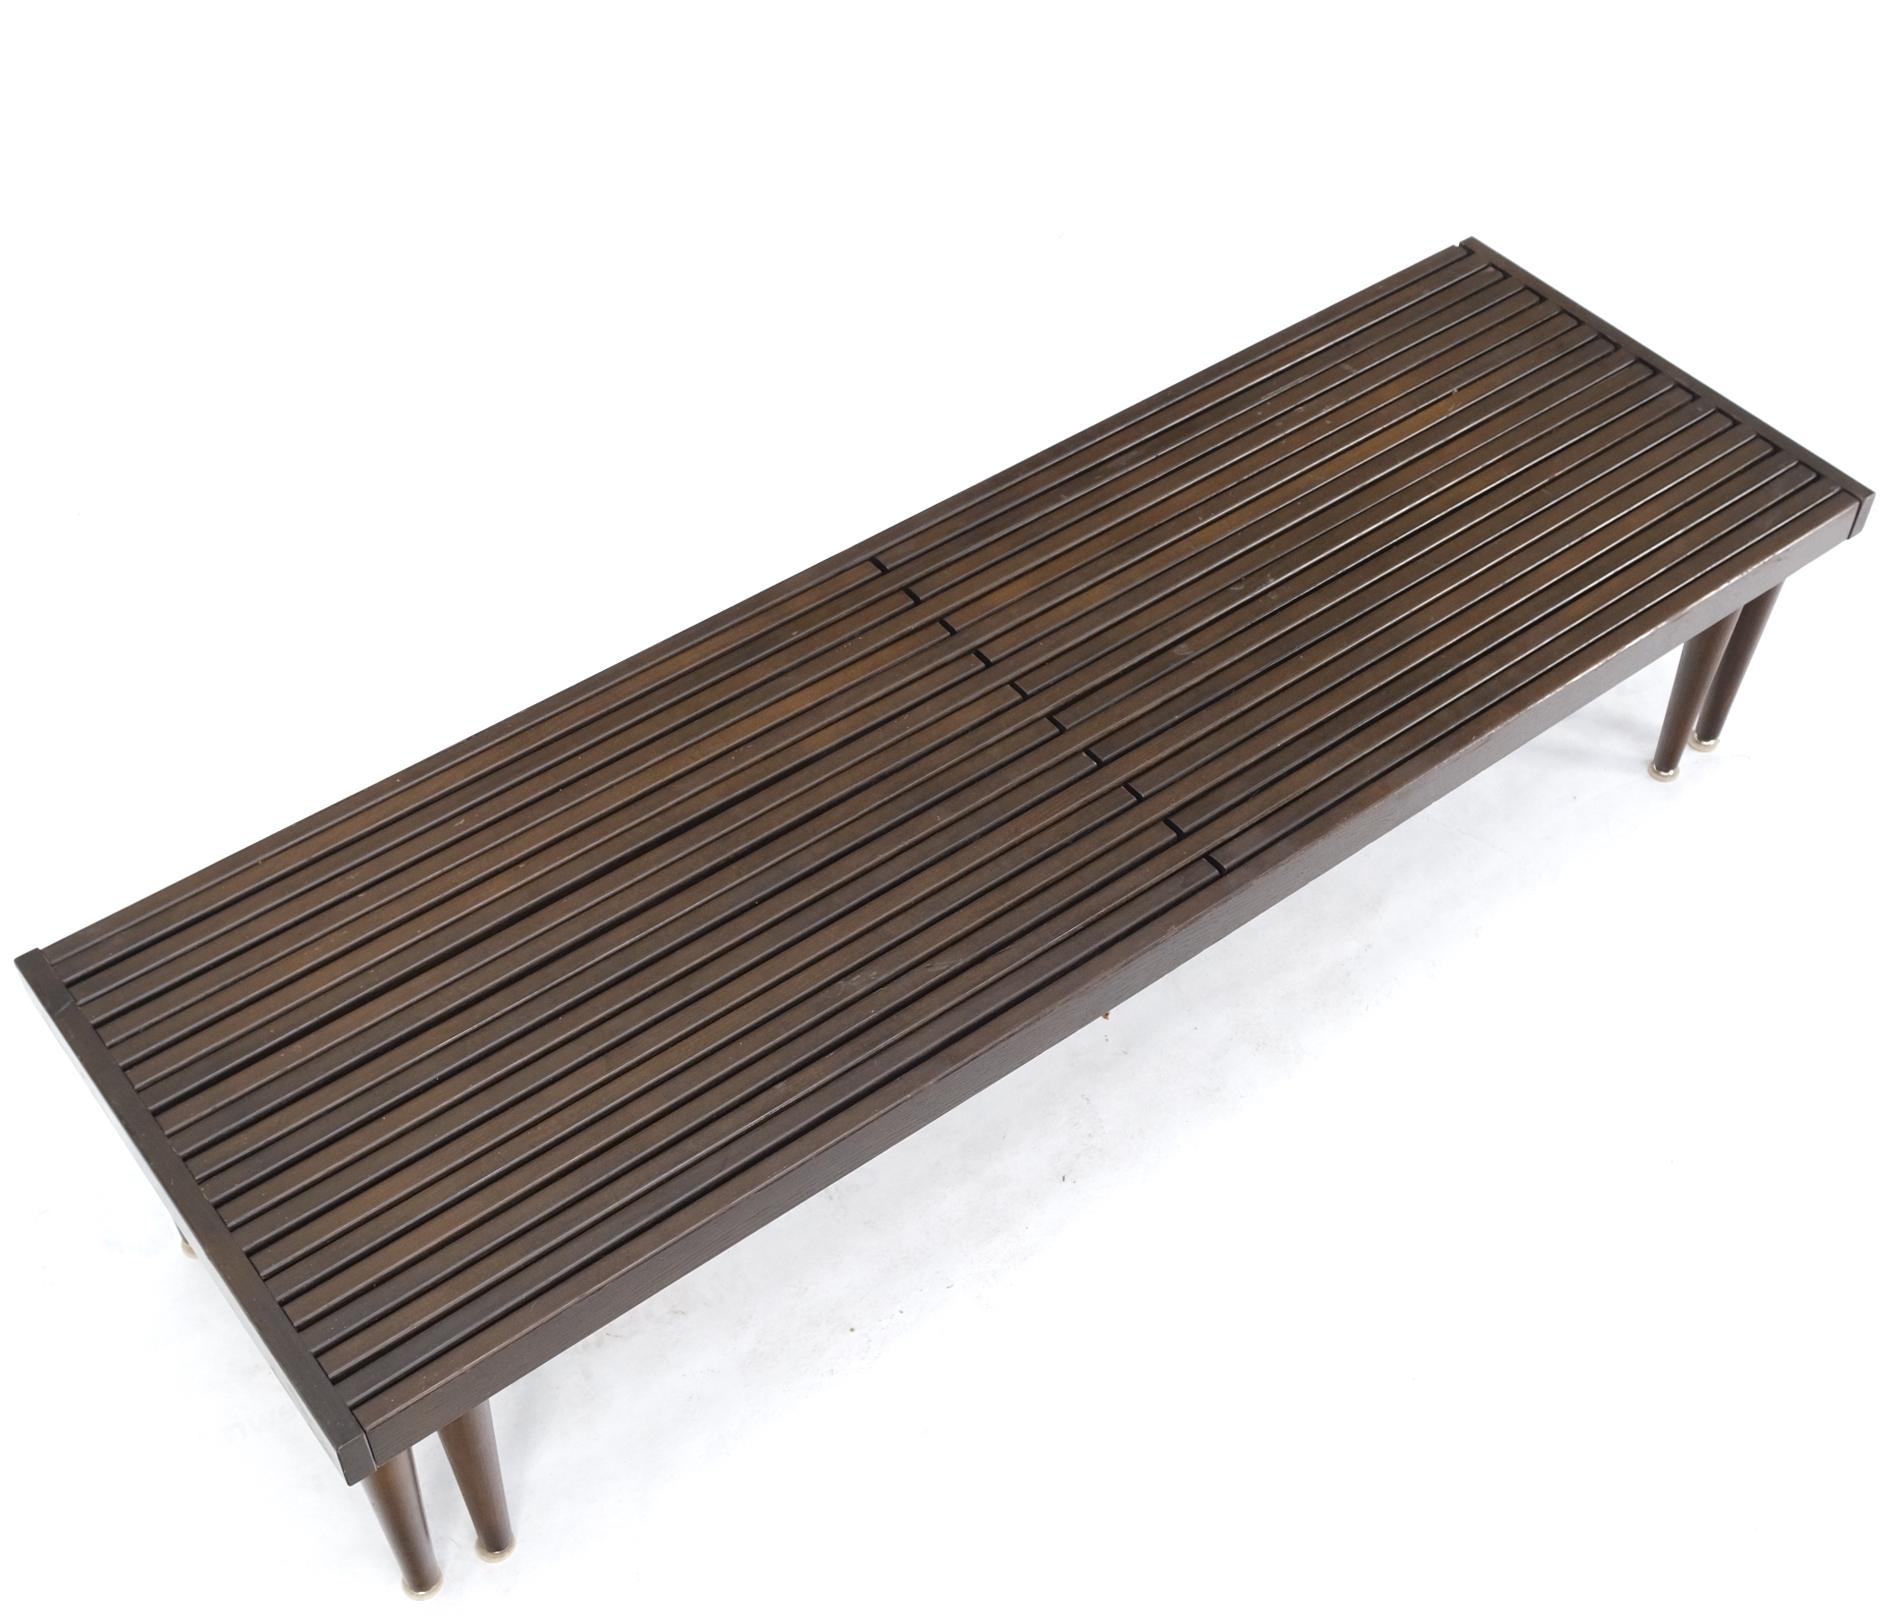 Large Mid-Century Modern expandable slat bench on tapered dowel cone legs.